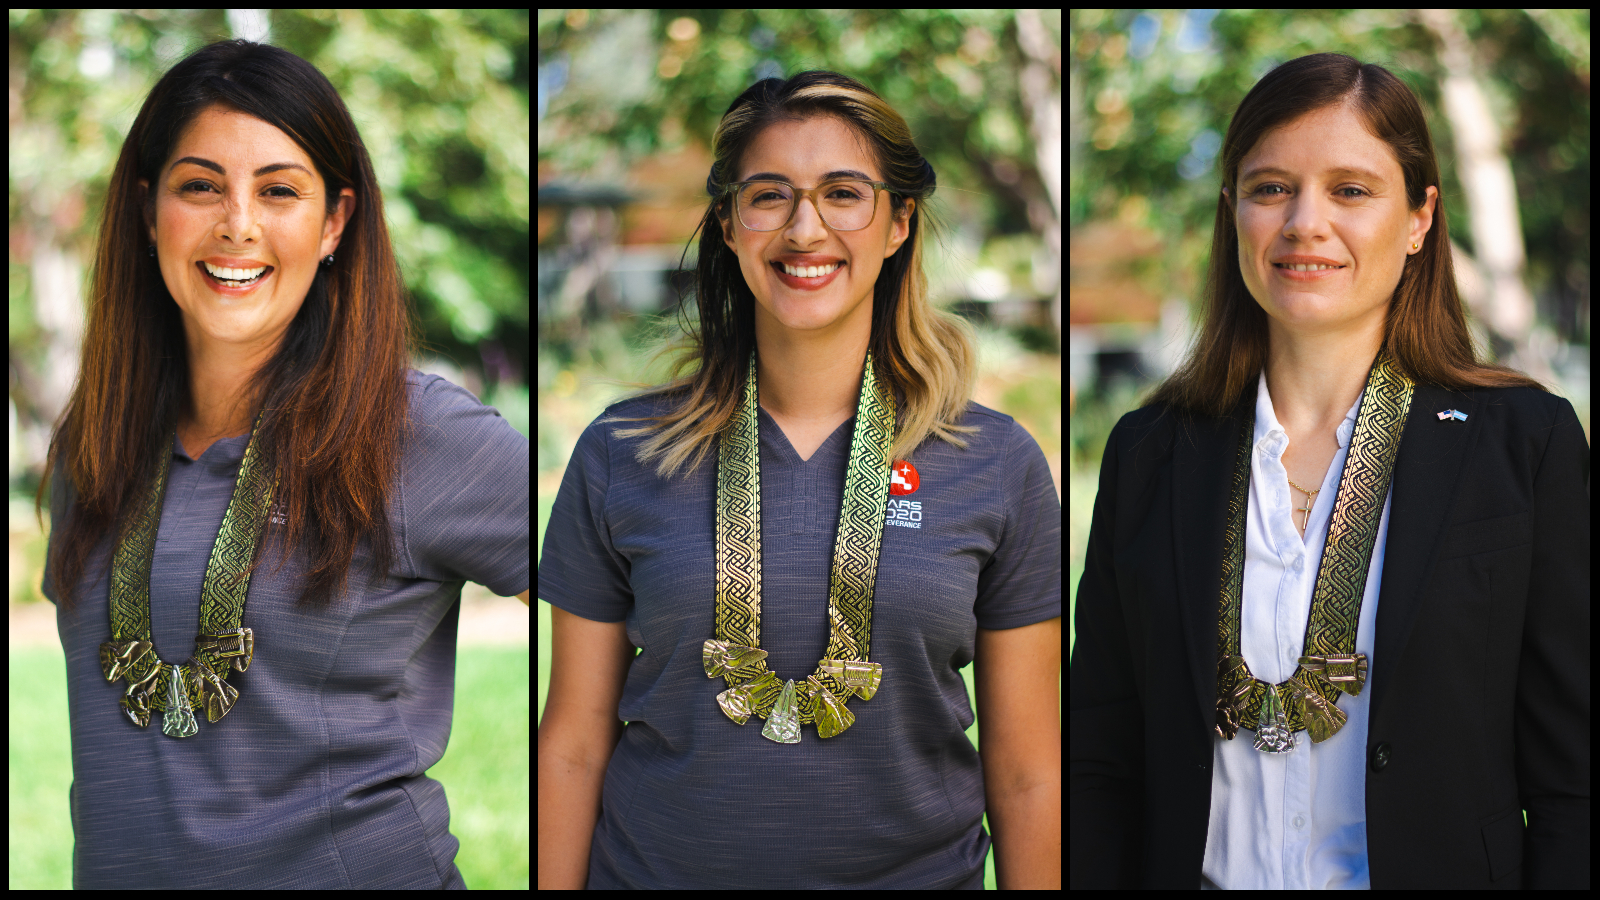 From left to right: Diana Trujillo, Christina Hernandez, and Clara O’Farrell are engineers with NASA’s Mars Perseverance rover team.